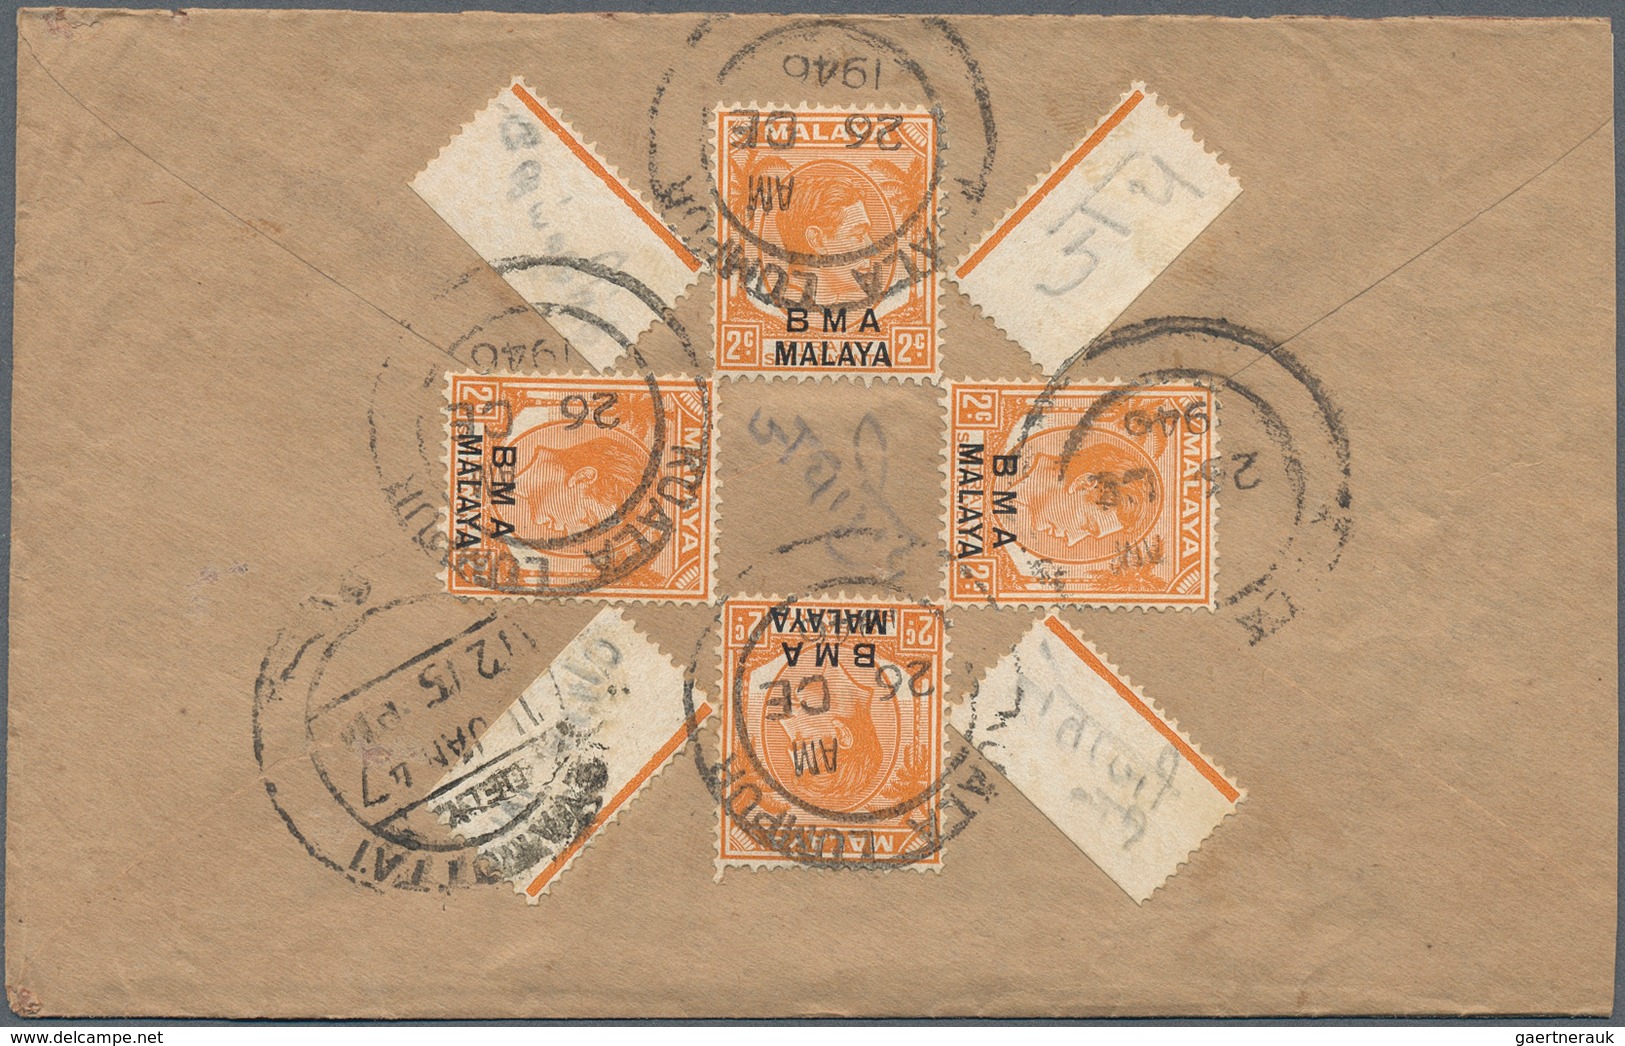 29501 Malaiische Staaten - Britische Militärverwaltung: 1945-48: Group Of 230 Covers All Franked By KGVI. - Malaya (British Military Administration)